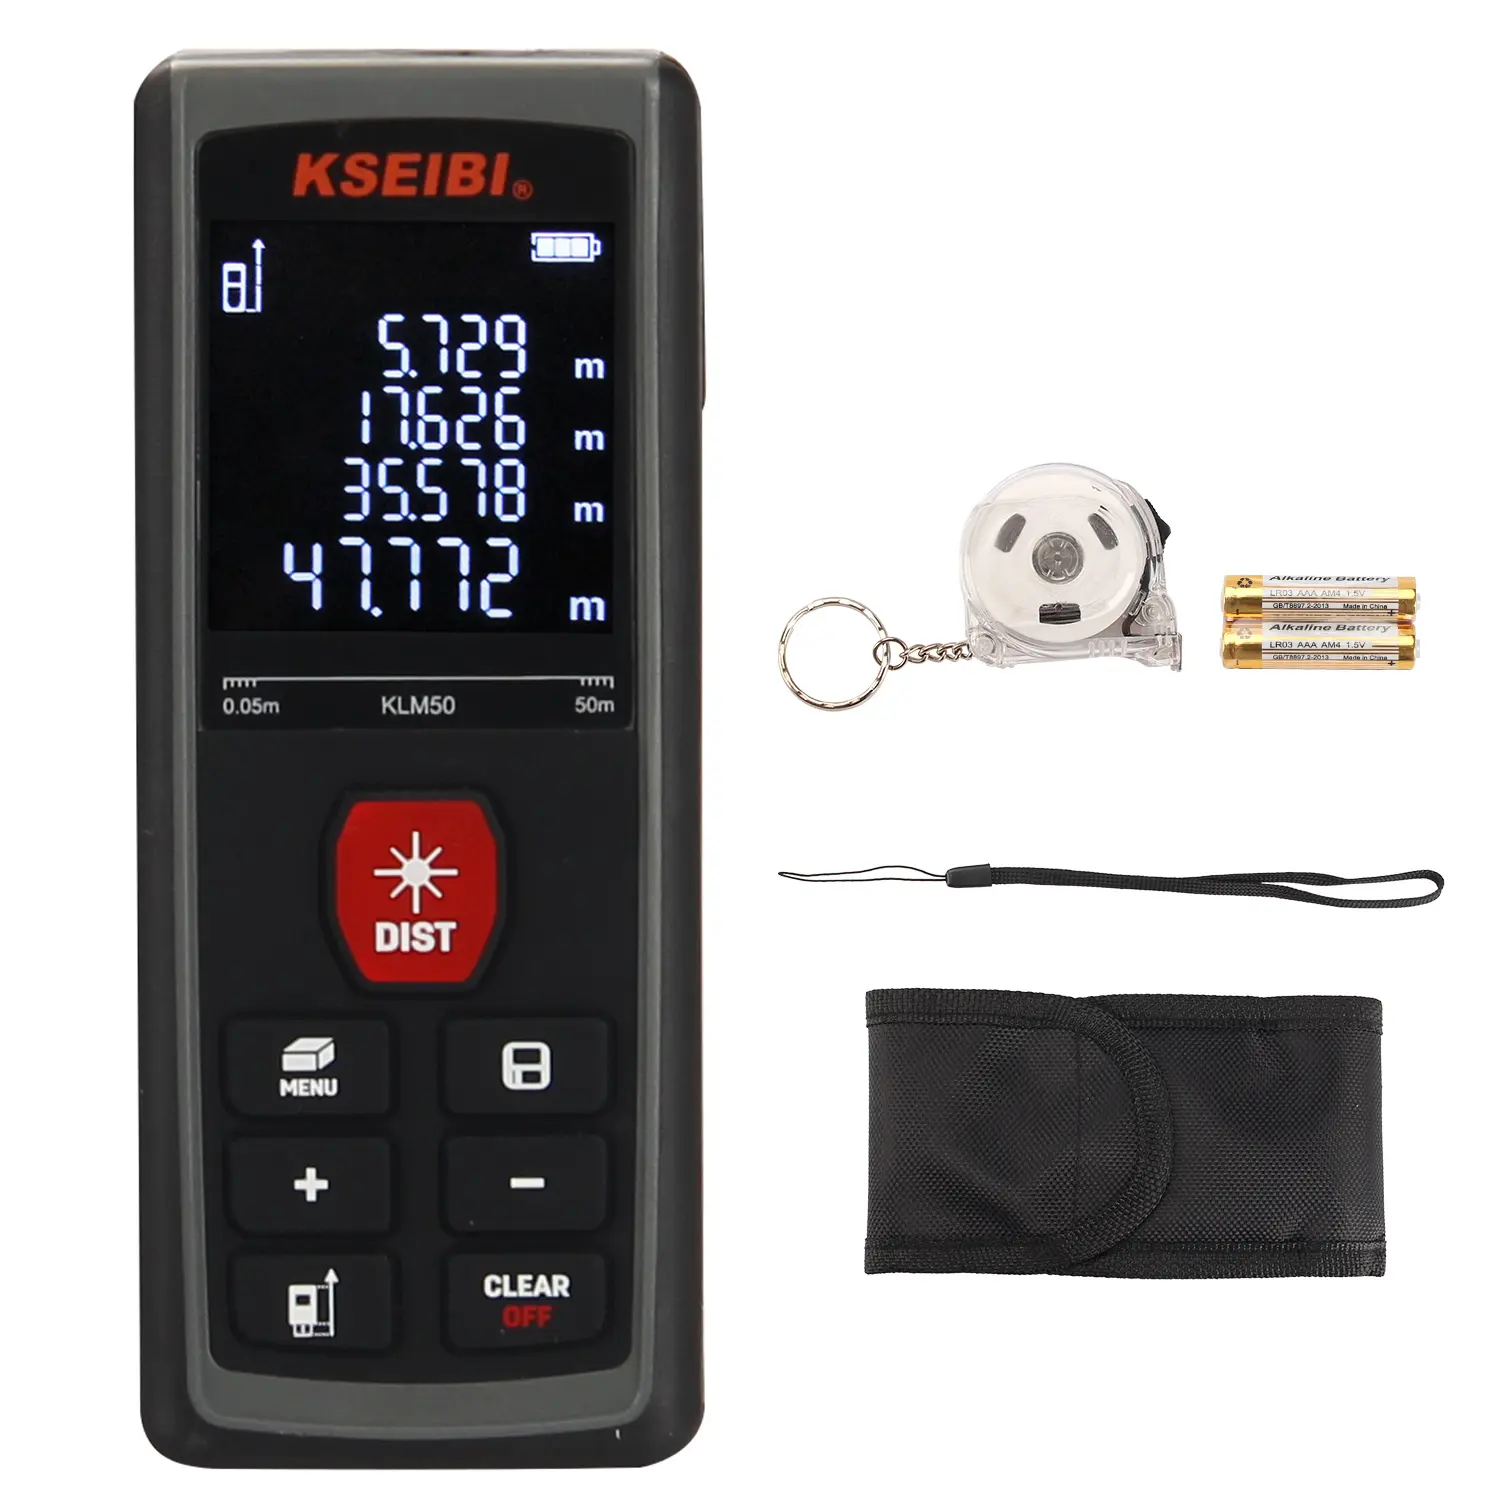 KSEIBI Professional Laser Measure 50M For Accurate and fast distance measurements up to 50 meters